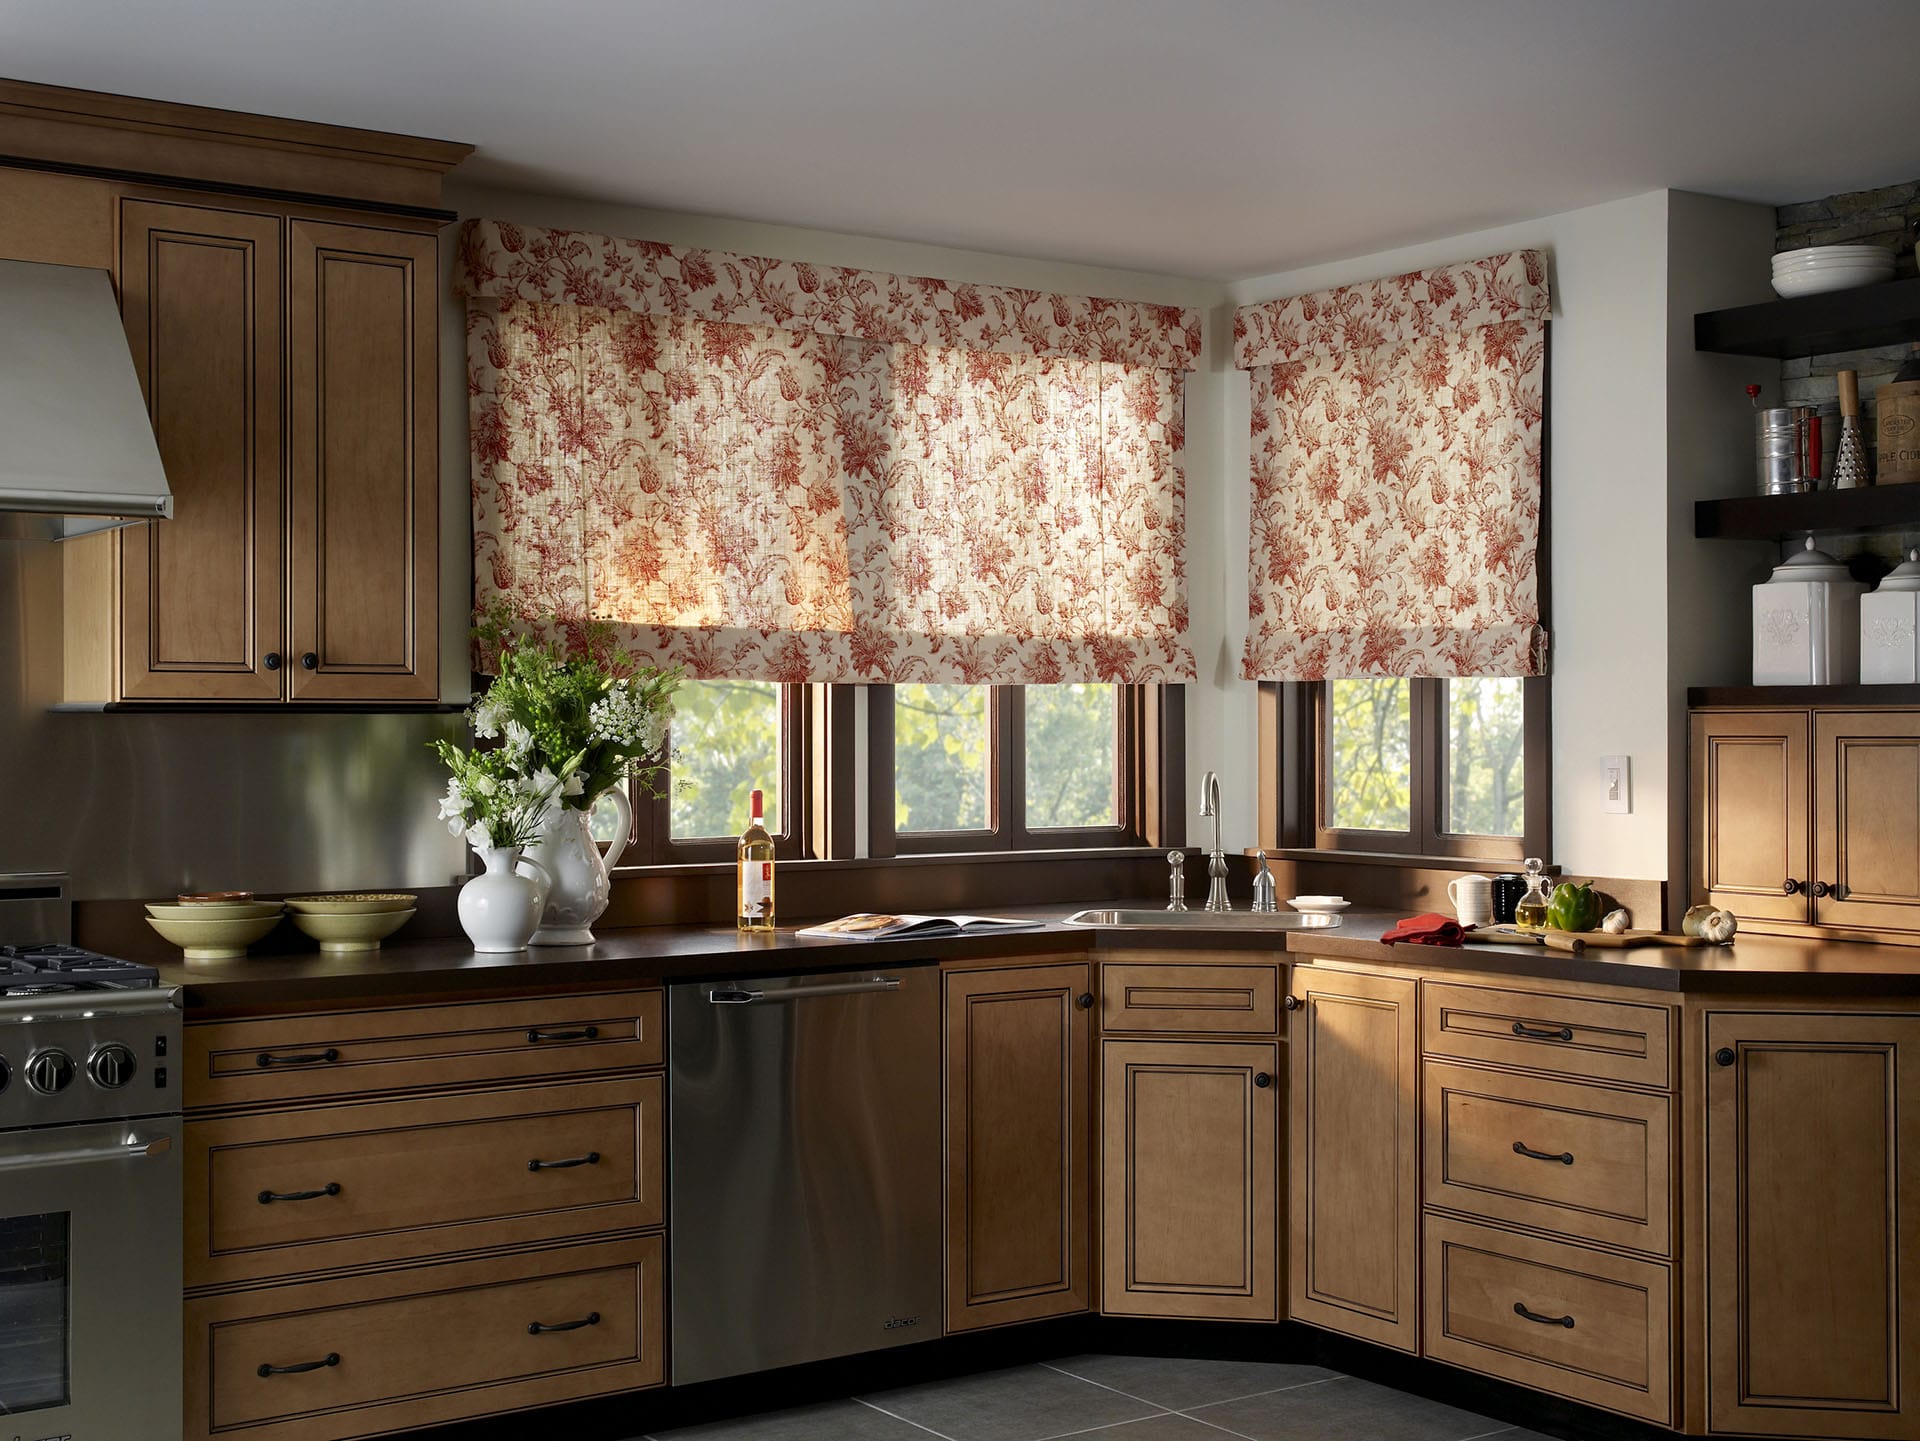 Guidelines for Choosing a Window Treatment featured image